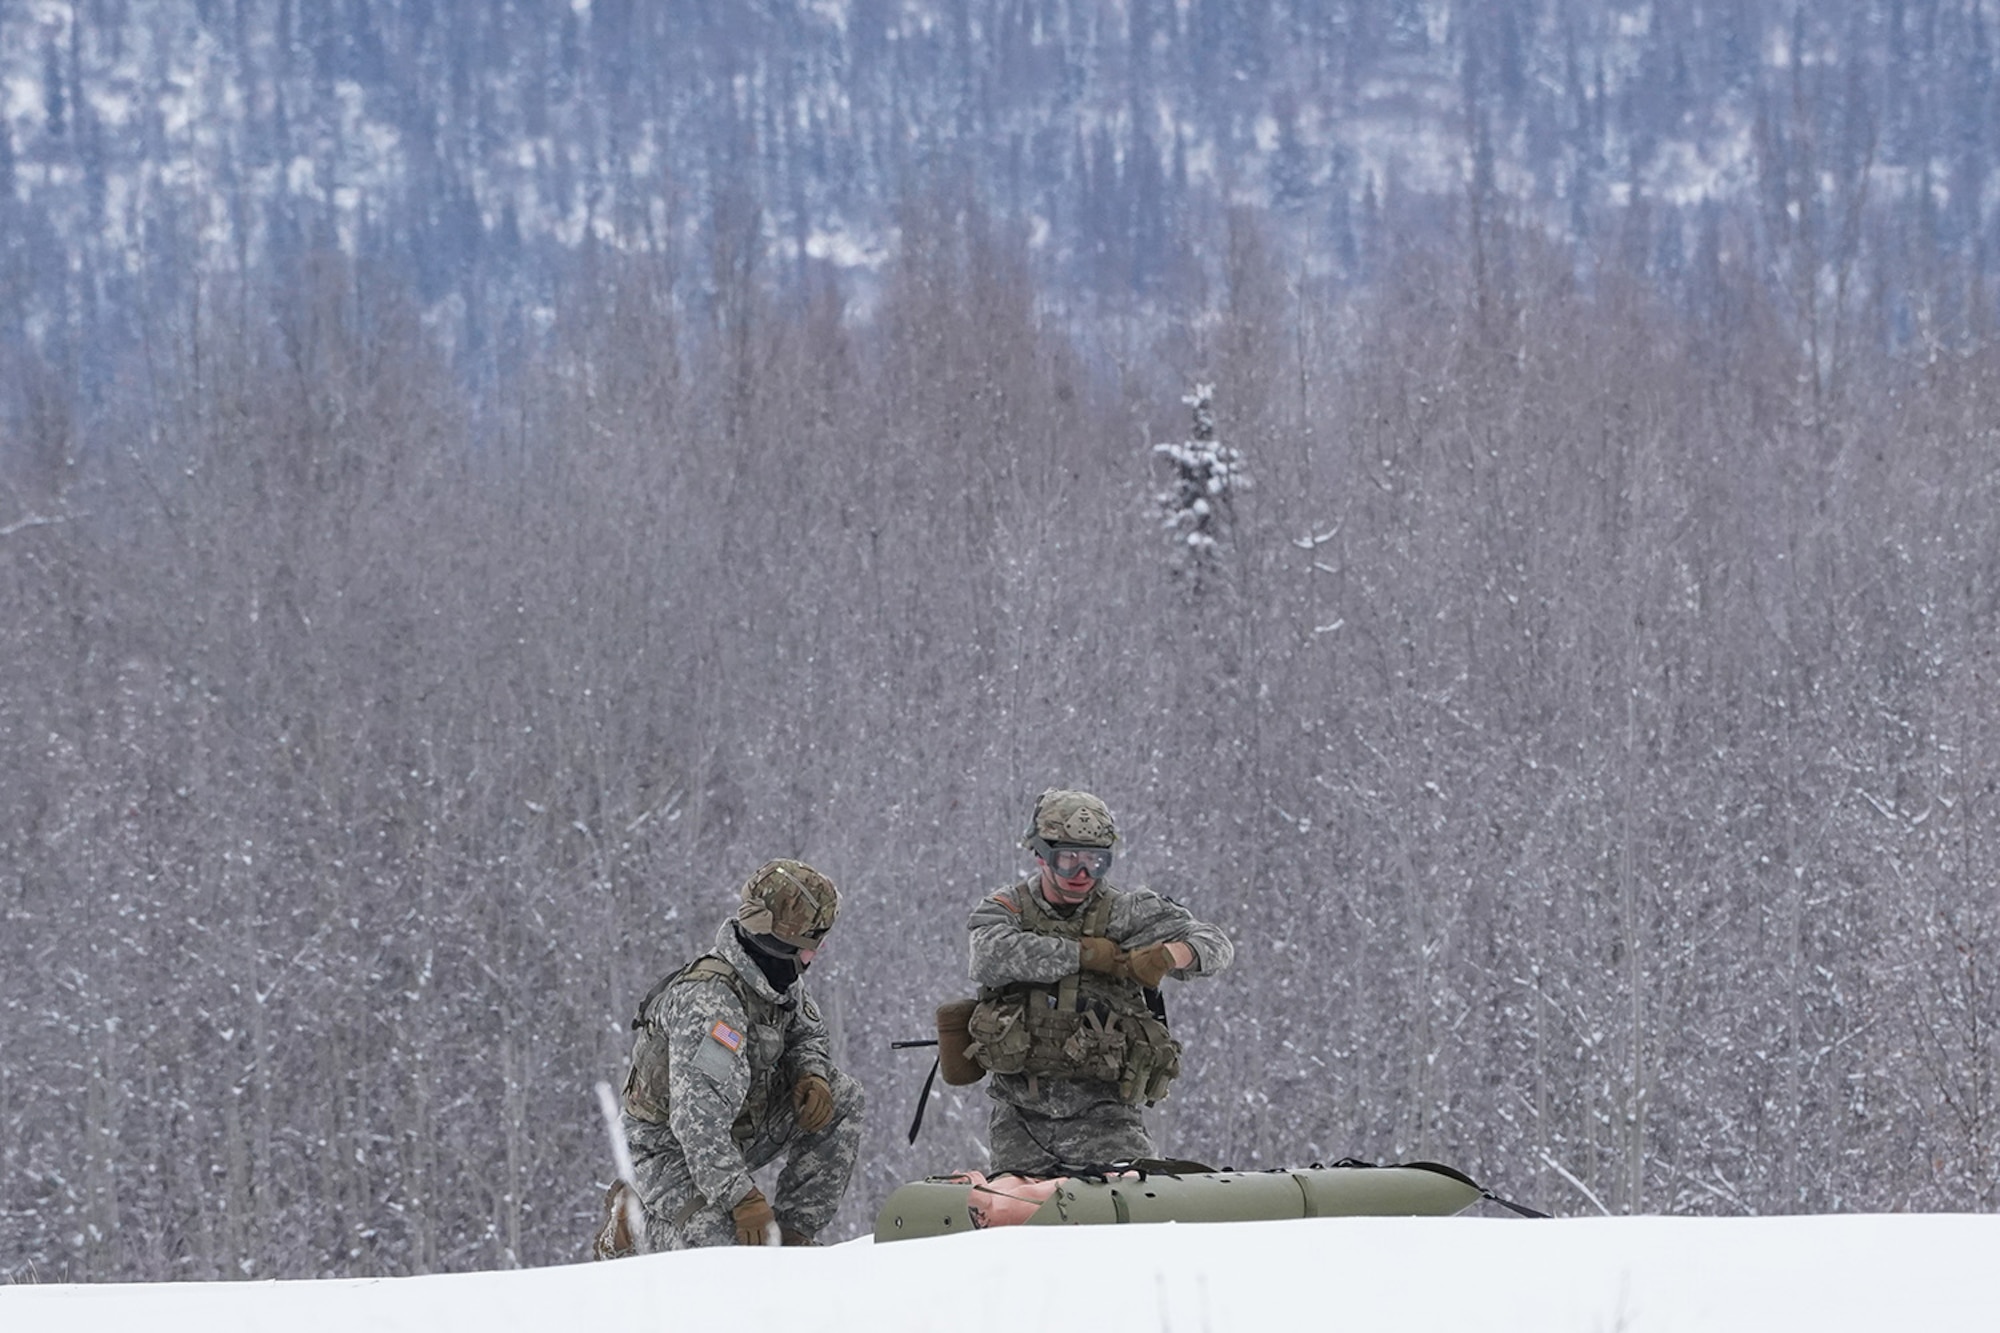 Medics from the 6th Brigade Engineer Battalion (Airborne), 4th Infantry Brigade Combat Team (Airborne), 25th Infantry Division, U.S. Army Alaska, guard a simulated casualty while training with aviators from the Alaska Army National Guard at Neibhur Drop Zone, Nov. 26, 2019, to hone their life-saving and Medevac hoist skills for the paratroopers’ upcoming rotation to the Joint Readiness Training Center at Fort Polk, La.